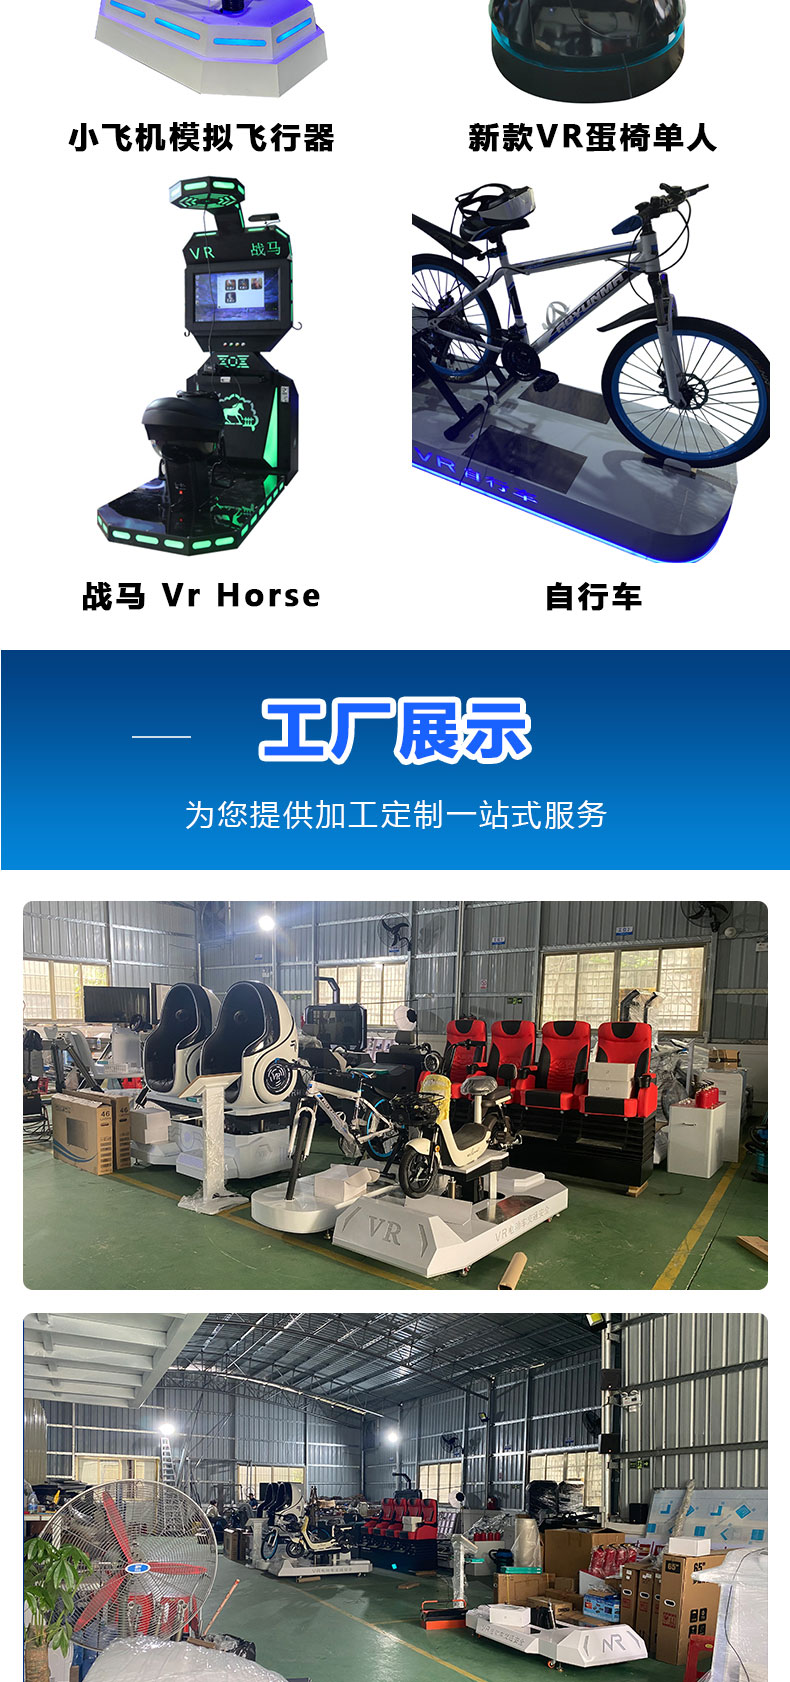 Single/double person VR simulation of aviation large-scale body feeling VR equipment, interstellar shuttle servo dynamic lifting and imaging